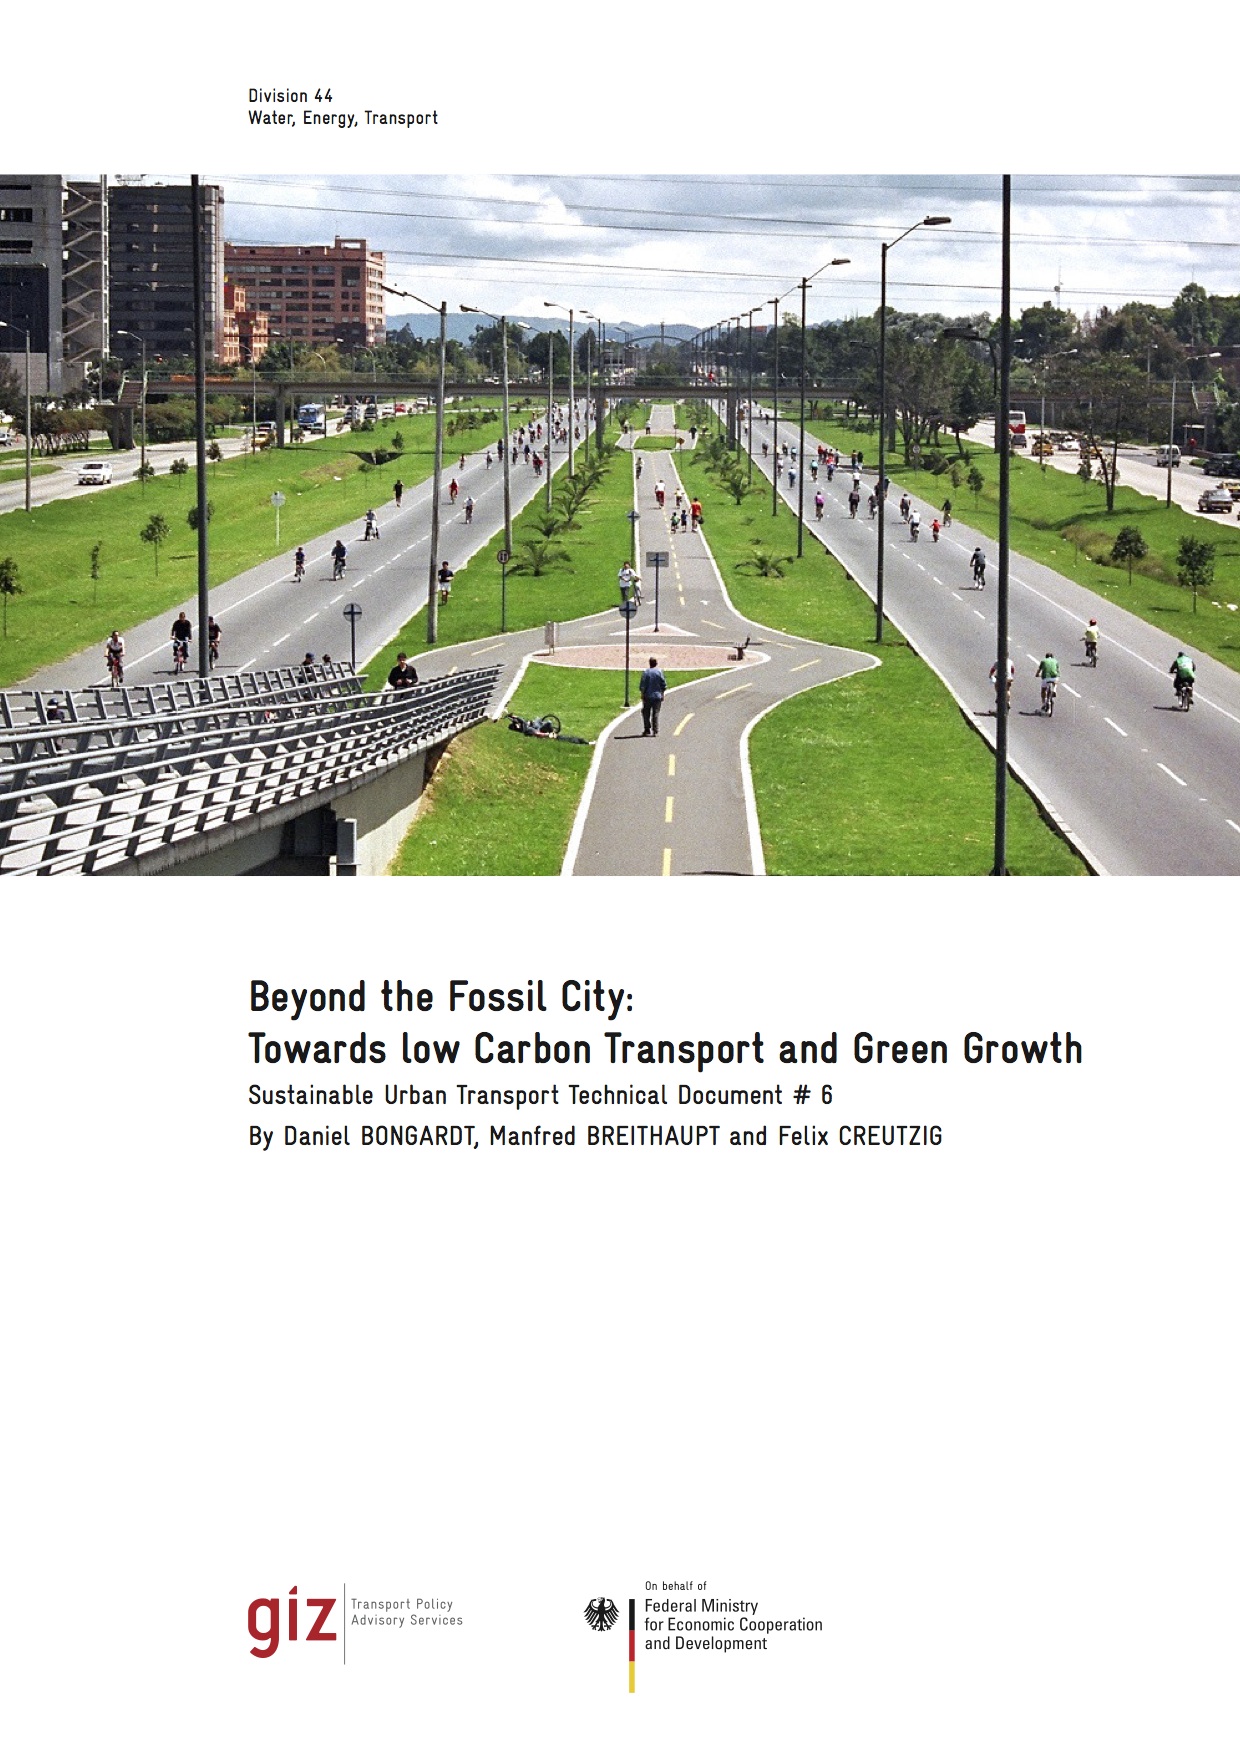 GIZ-Technical-Paper-6-Beyond-the-Fossil-City_Towards-Low-Carbon-Transport-and-Green-Growth